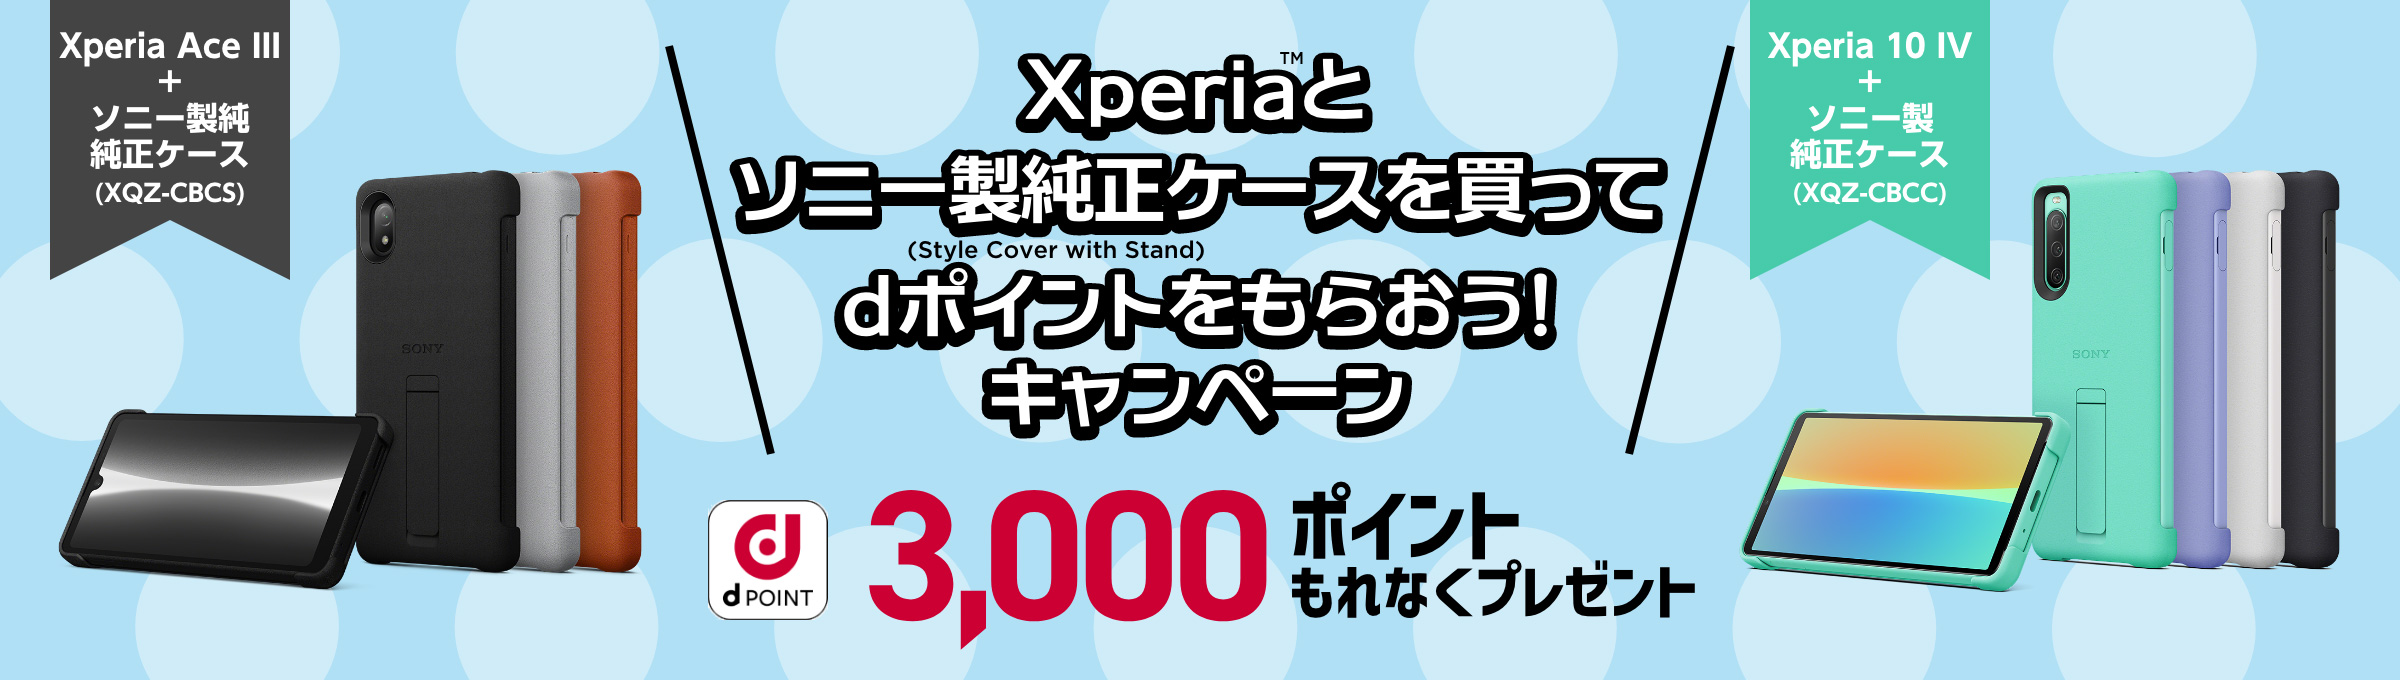 Xperia™とソニー製純正ケース（Style Cover with Stand）を買ってdポイントをもらおう！キャンペーン d POINT 3,000ポイントもれなくプレゼント Xperia Ace III + ソニー製純正ケース（XQZ-CBCS） Xperia 10 IV ＋ソニー製純正ケース（XQZ-CBCC）